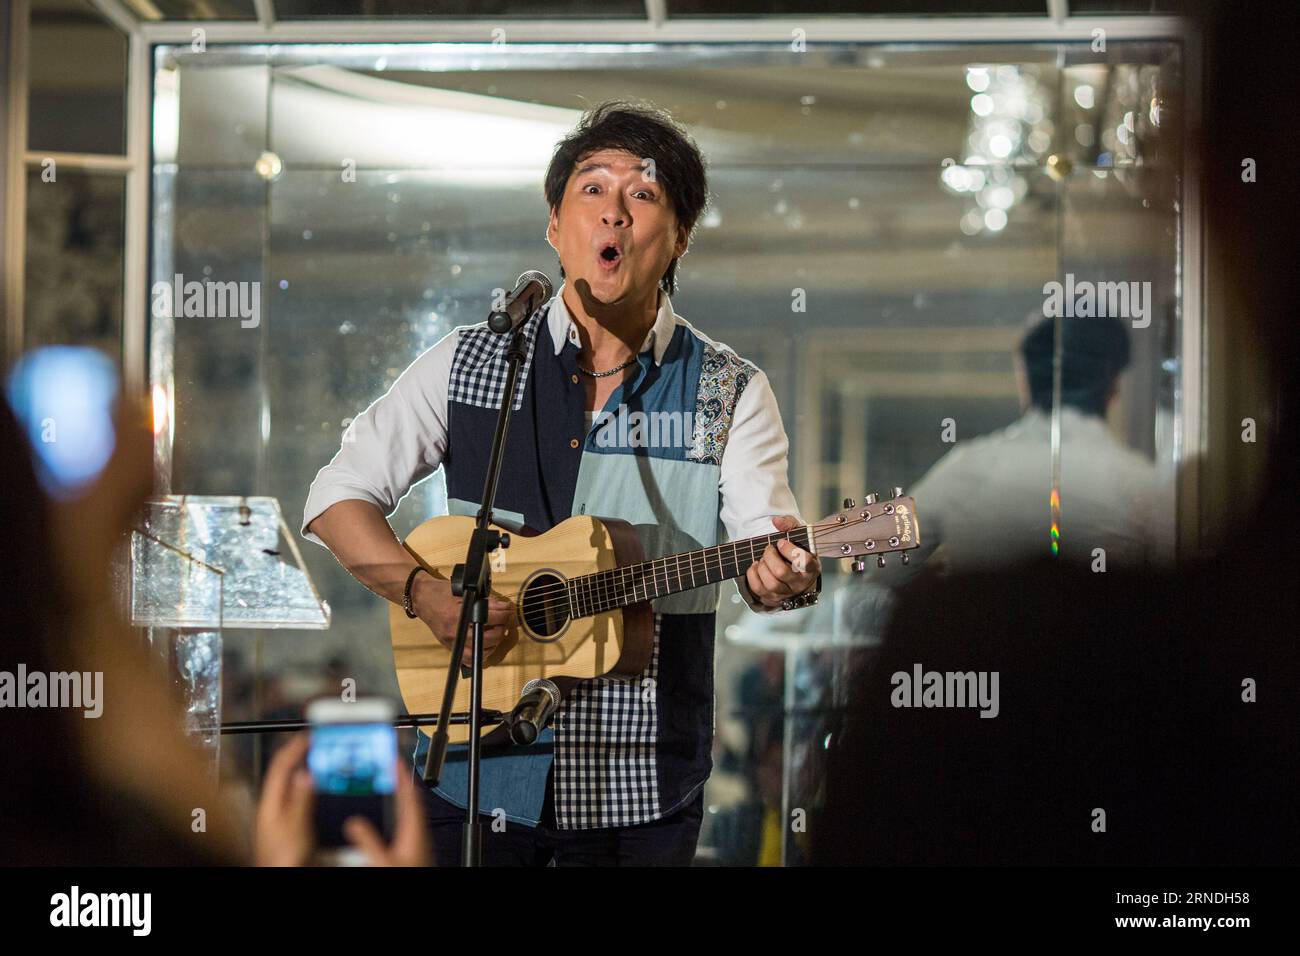 (160520) -- NEW YORK, May 20, 2016 -- Singer Emil Wakin Chau sings during a press conference for his upcoming concert What we are going to sing today in New York, the United States on May 20, 2016. Emil Wakin Chau will hold his personal concert What we are going to sing today at Lincoln Center in New York on May 22. ) U.S.-NEW YORK-WAKIN CHAU-CONCERT-PRESS CONFERENCE LixMuzi PUBLICATIONxNOTxINxCHN   160520 New York May 20 2016 Singer Emil Wakin Chau Sings during a Press Conference for His upcoming Concert What We are Going to Sing Today in New York The United States ON May 20 2016 Emil Wakin C Stock Photo